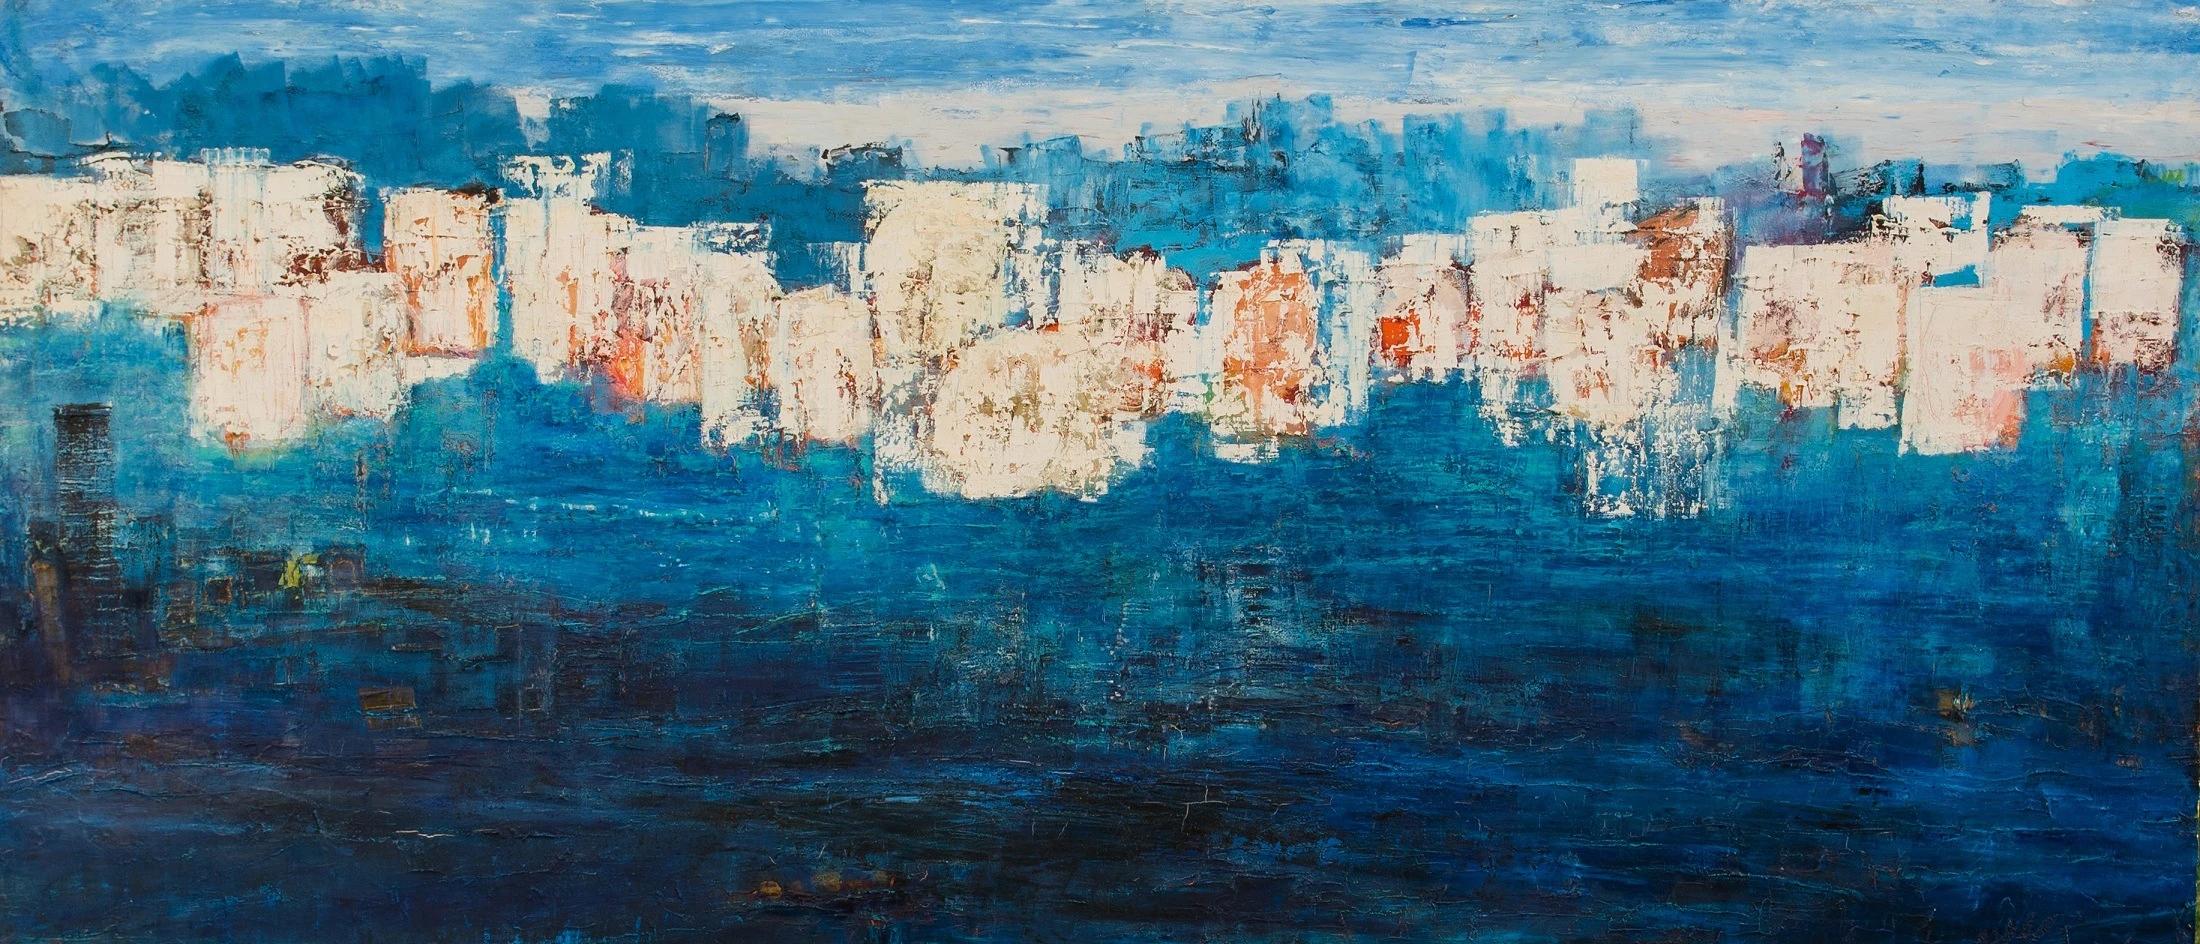 "Submerged" Abstract Mixed Media Painting 67" x 149" inch by Ahmed Farid

mixed media on canvas

Born in Cairo, Egypt, in 1950 where he currently lives and works, Farid is an autodidact Egyptian painters who trained privately in immersion